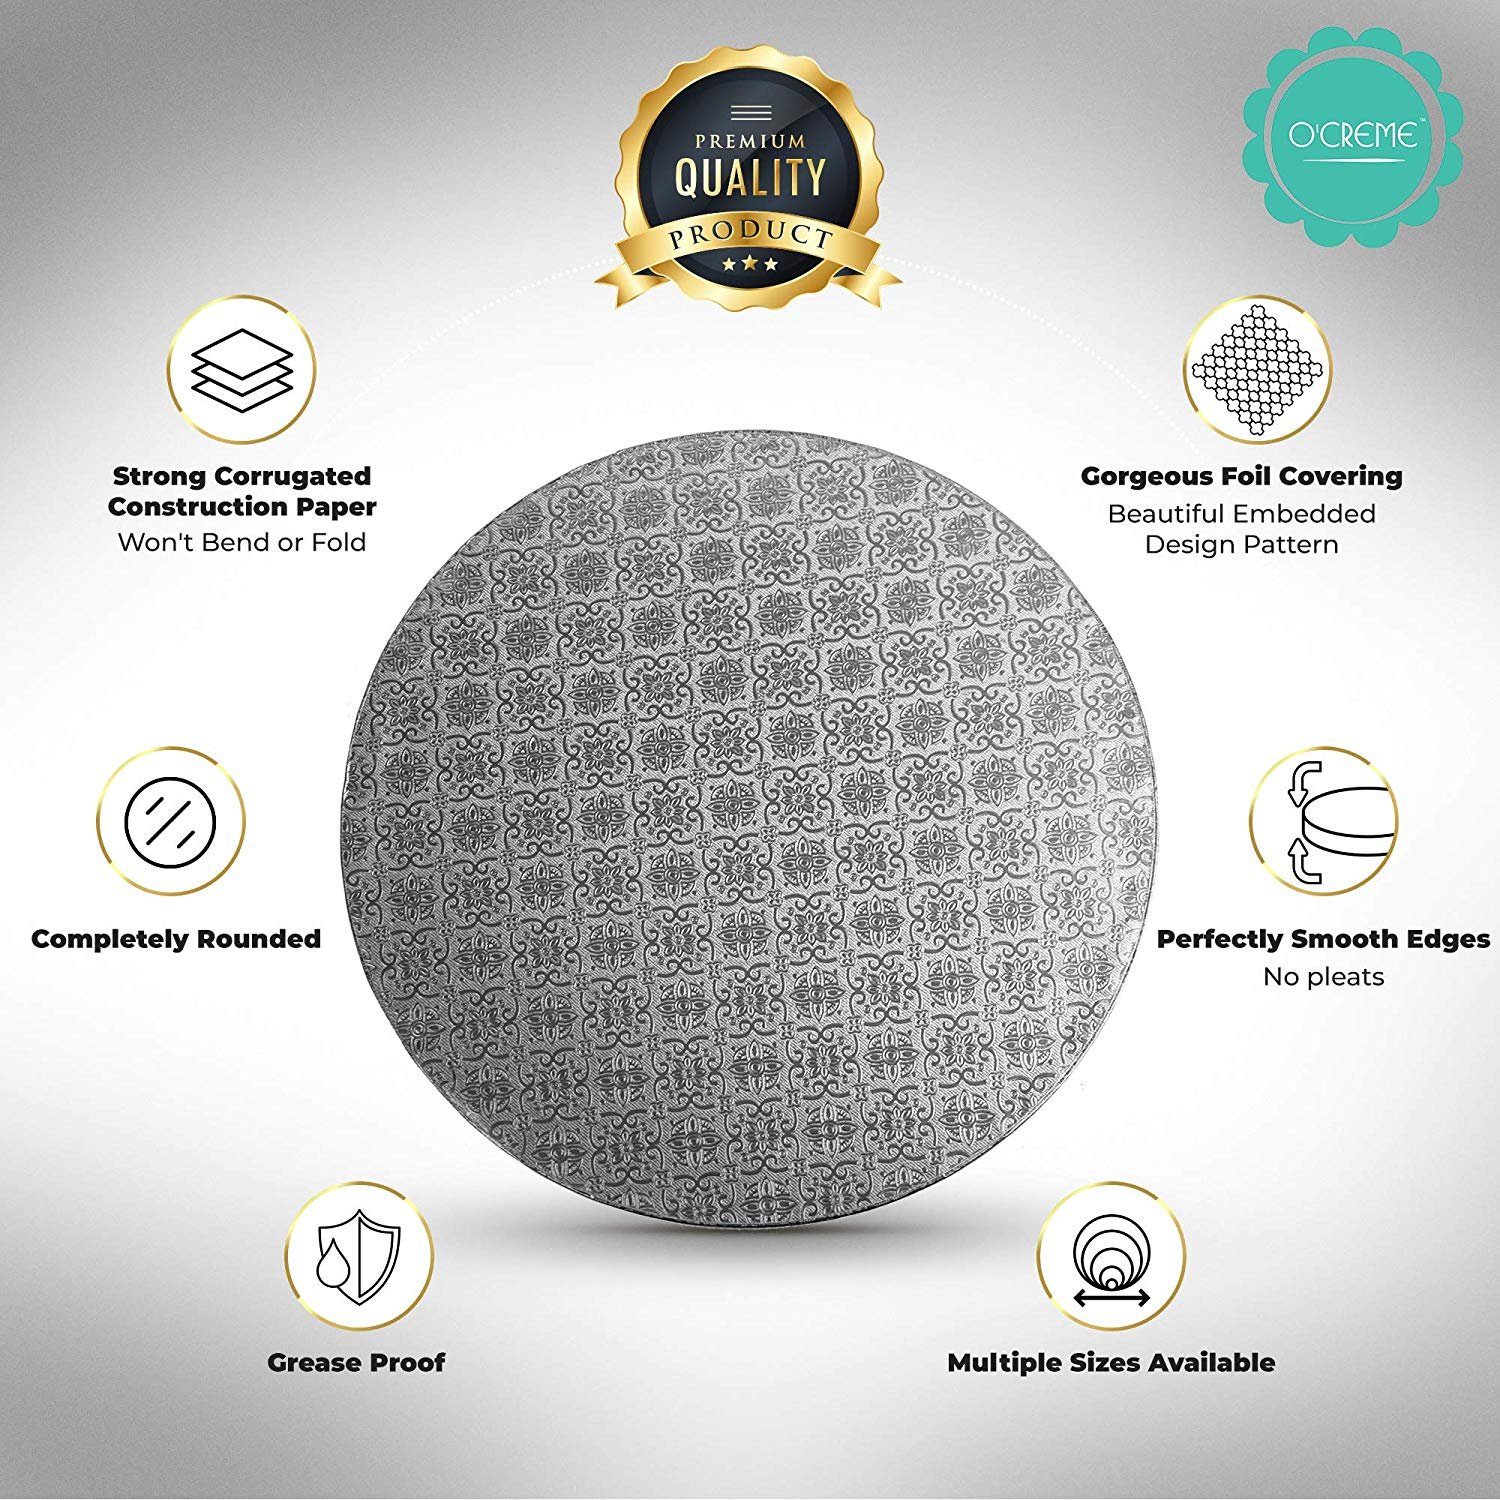 OCreme Cake Board, Silver Foil Round Cake Circles with Gorgeous Design, Sturdy & Durable 1/2 Thick Cake Drums, Round Cake Boards with 12 Diameter, Pack of 5 Disposable Cake Drums - image 4 of 6